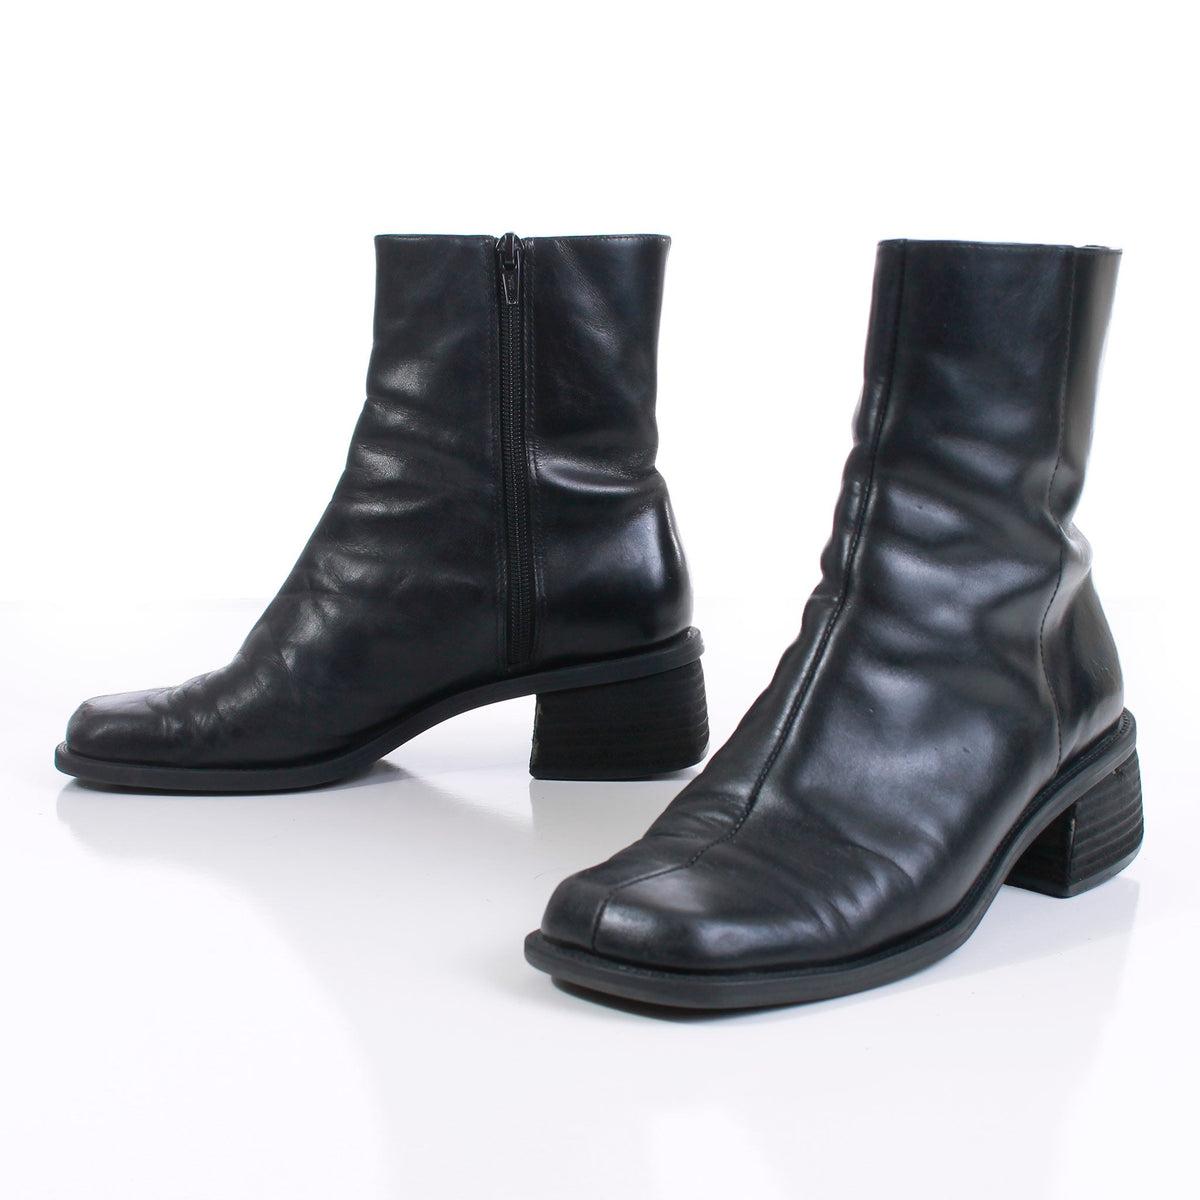 90s Minimal Black Leather Block Heel Ankle Boots Women's Size 6.5 USA ...